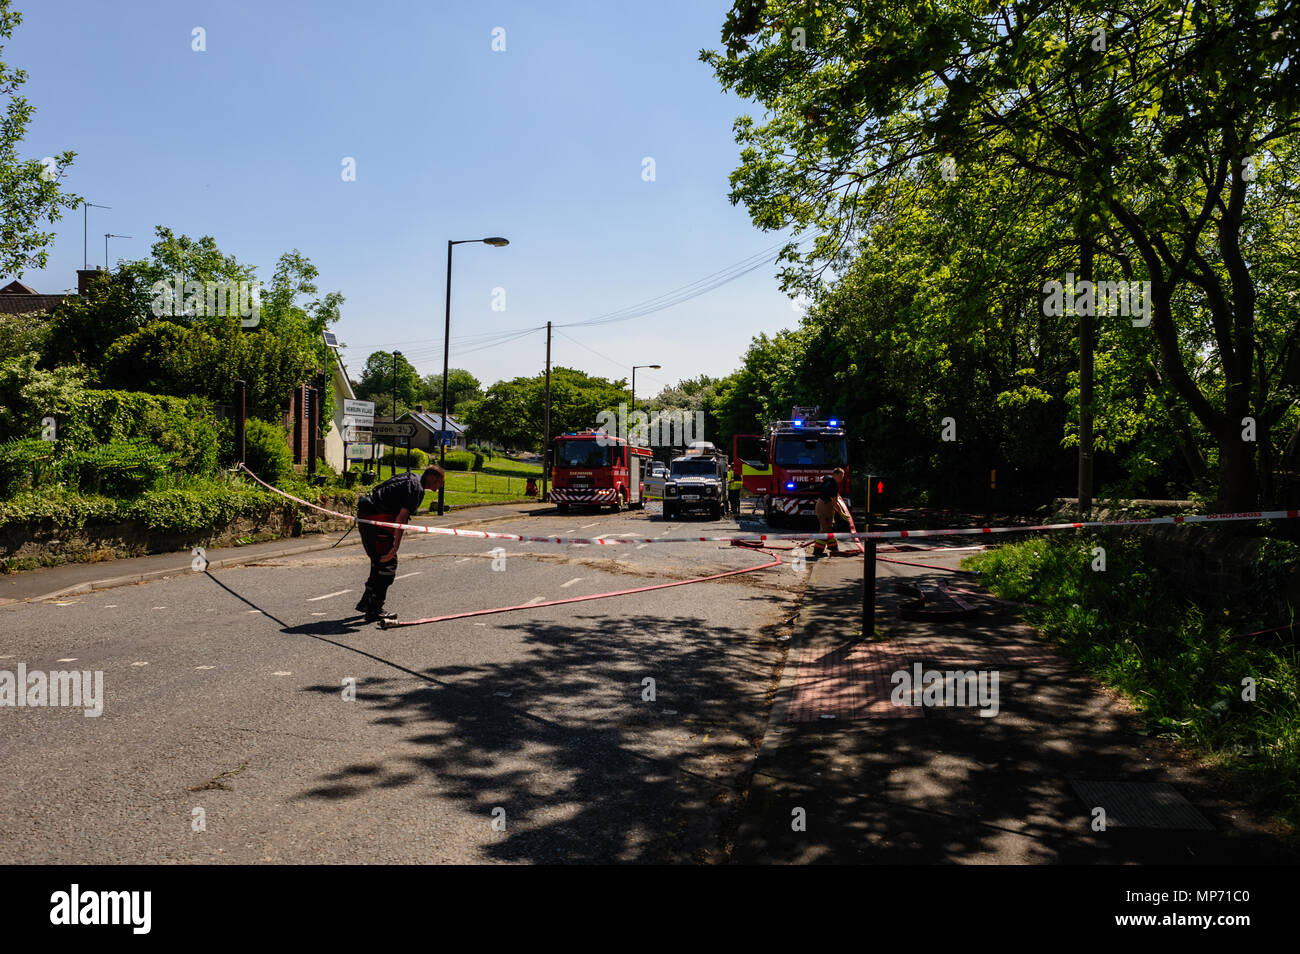 Newburn, UK. 21st May 2018. Firefighters Tend to a Burst Water Main On Station Road, Newburn Credit: James W. Fortune/Alamy Live News Stock Photo